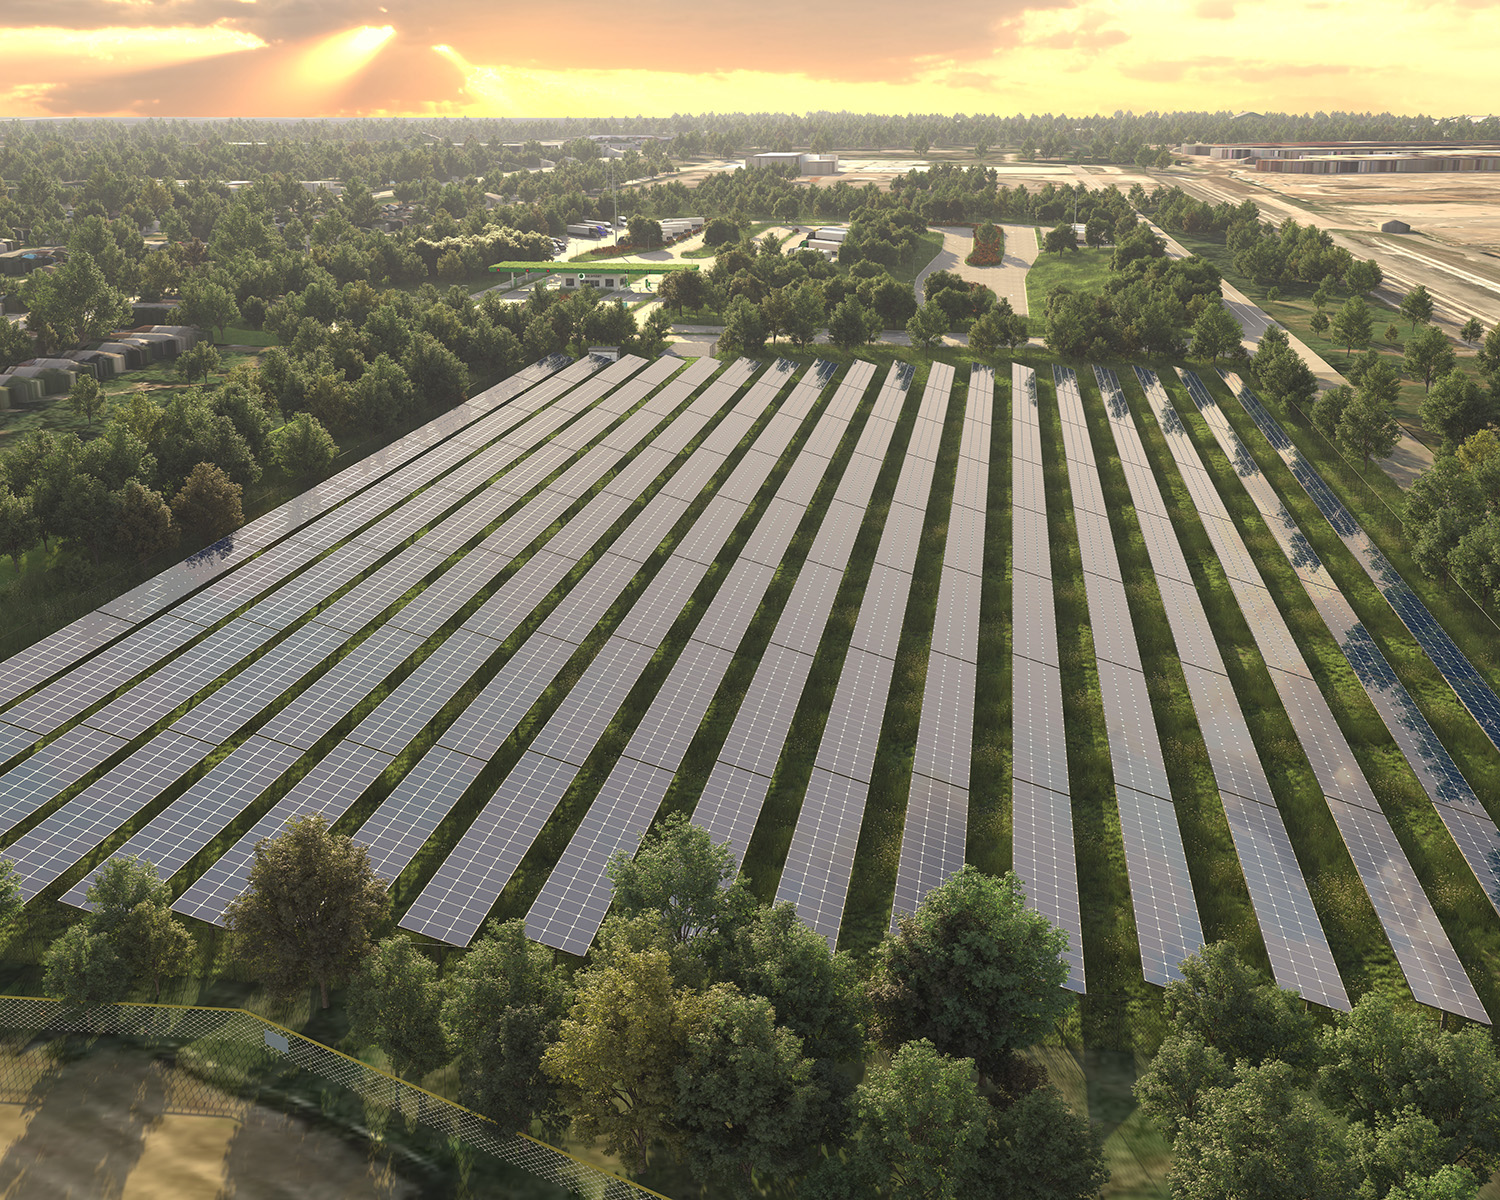 Solar Field at The Invert Chicago. Rendering by The Invert Chicago